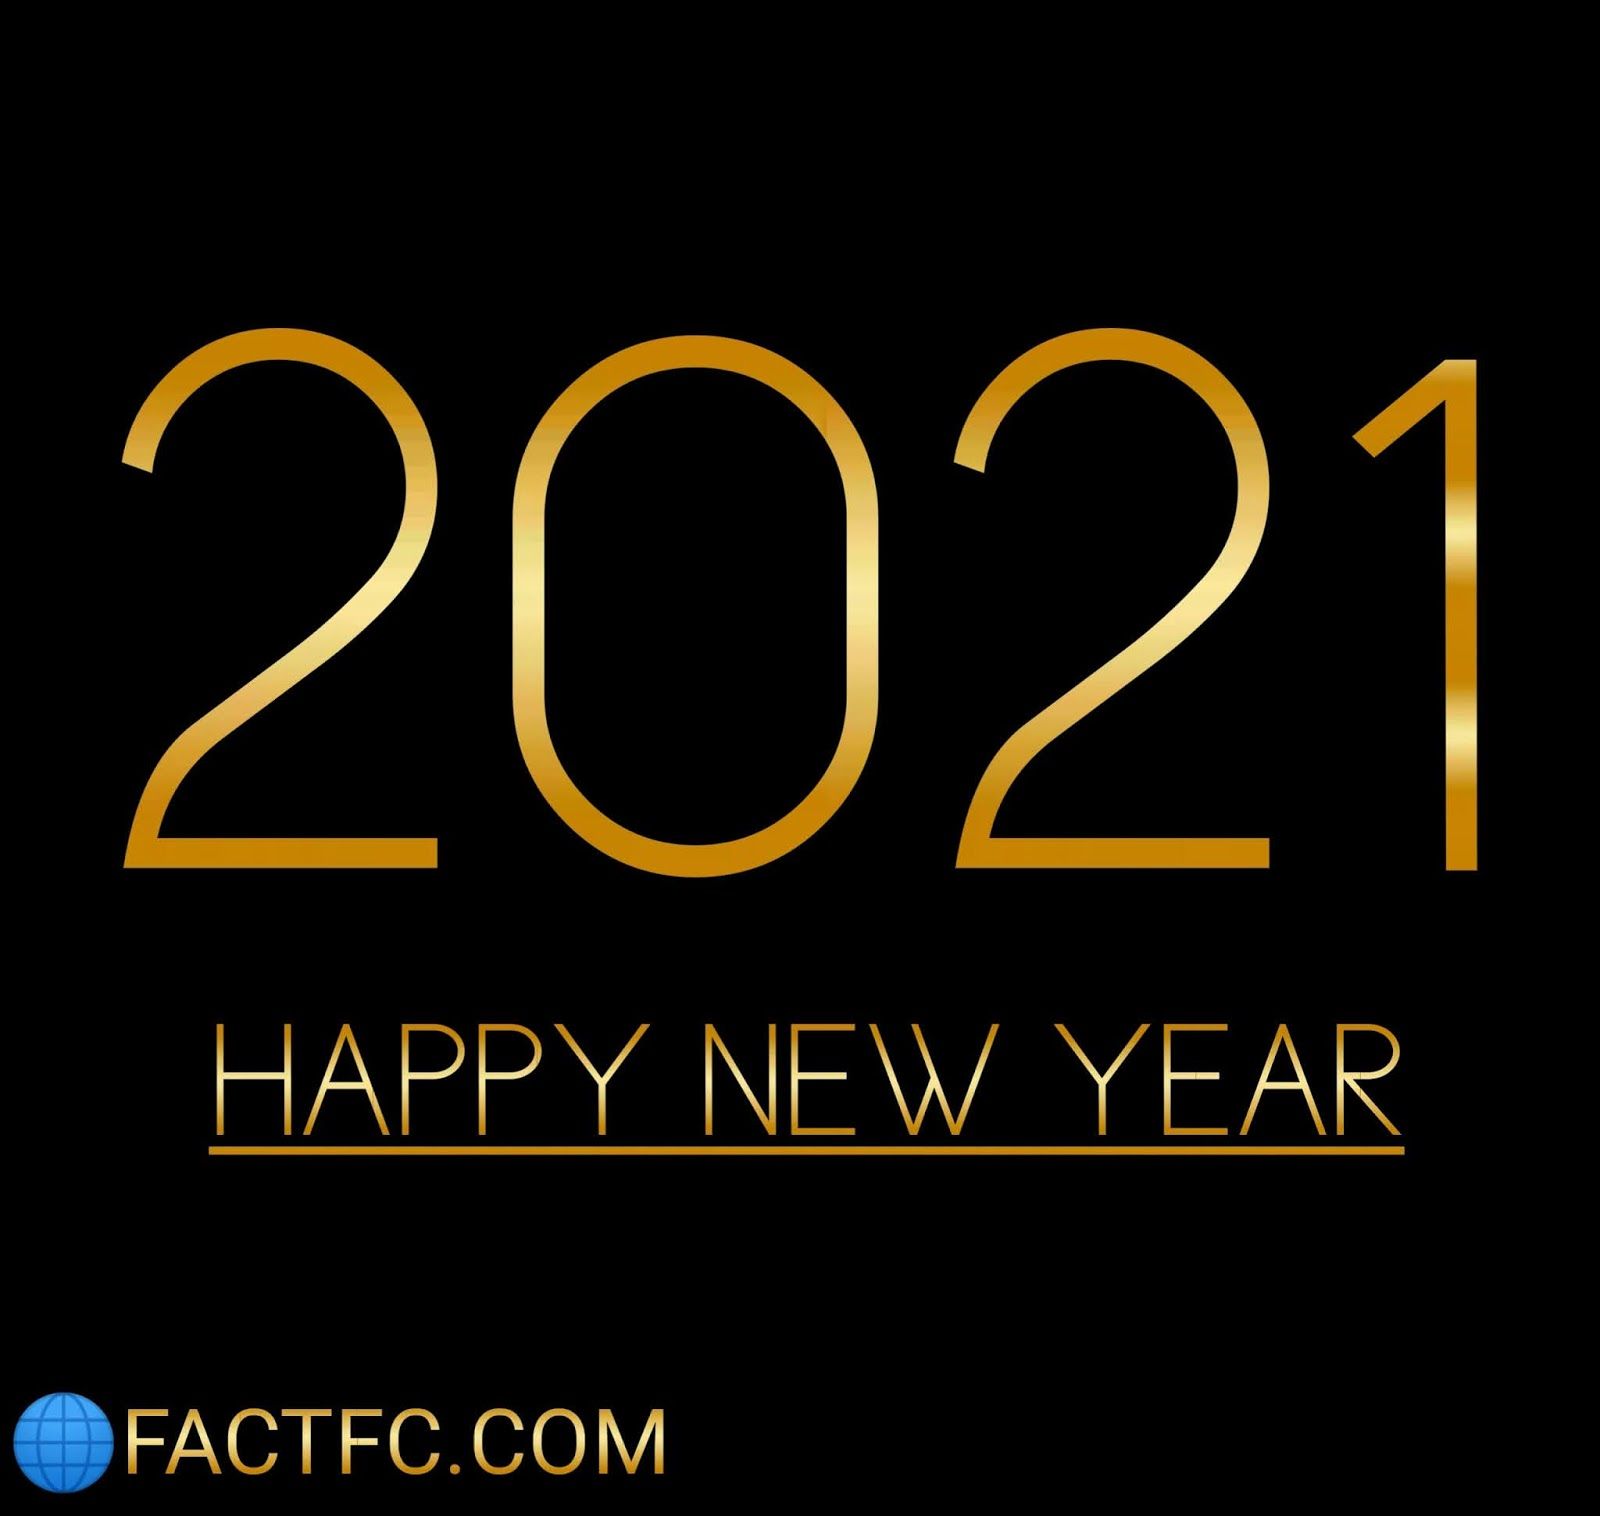 Happy New Year 2021 Image Wishes, Greetings, Quotes, Sms & Gifs HD